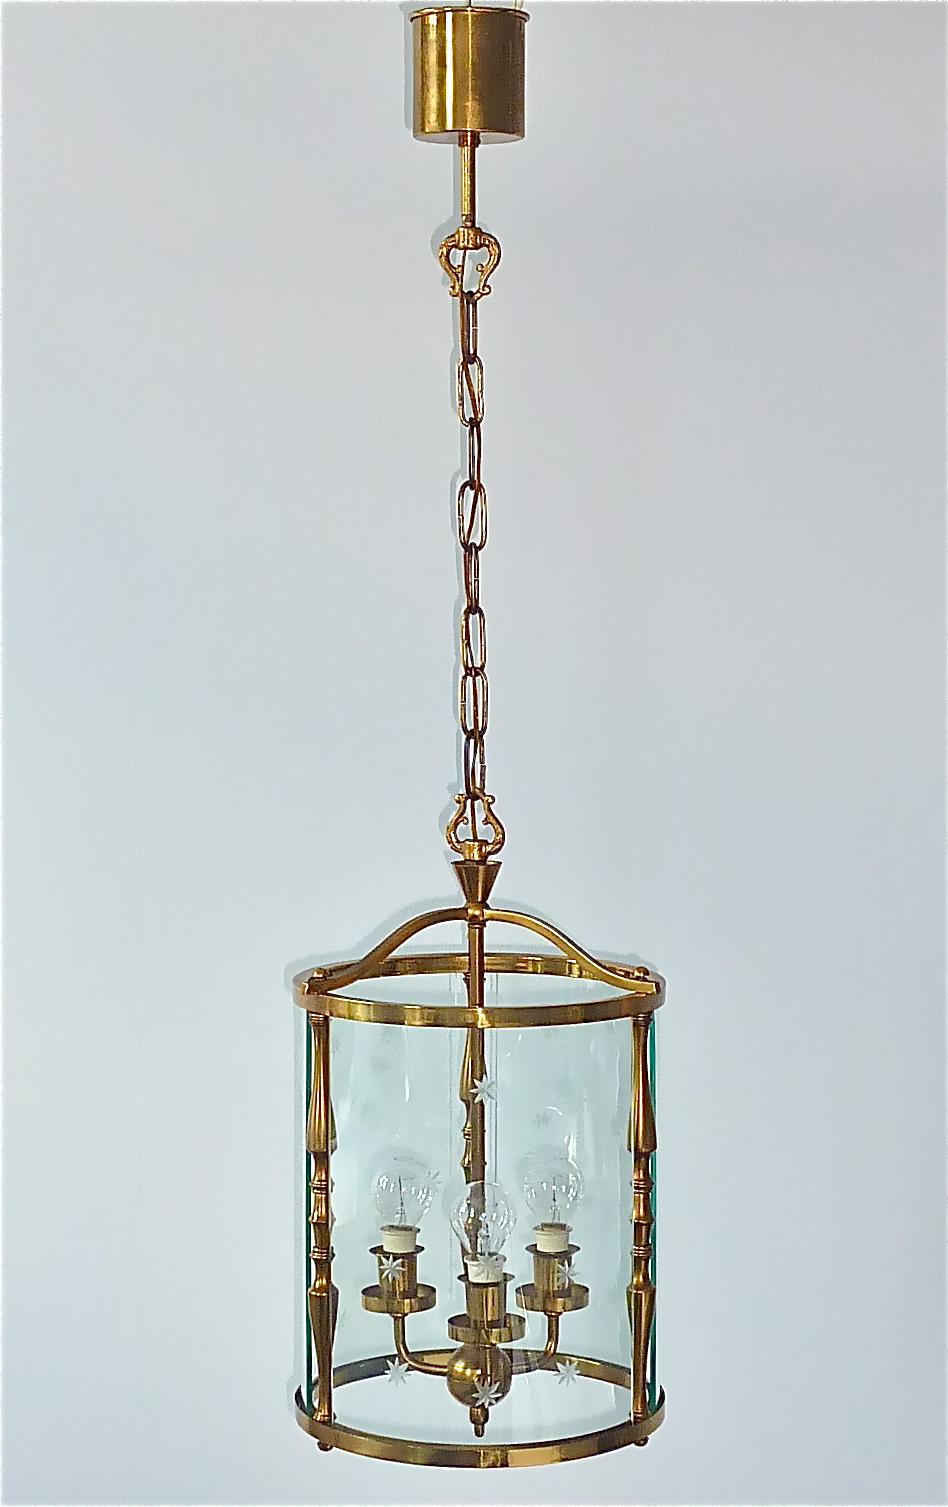 Great Italian Midcentury solid patinated brass lantern or pendant lamp possibly made by Fontana Arte attribution and designed by Pietro Chiesa attribution, Italy around 1950s. The fabulous of vintage light takes three E14 standard screw bulbs to